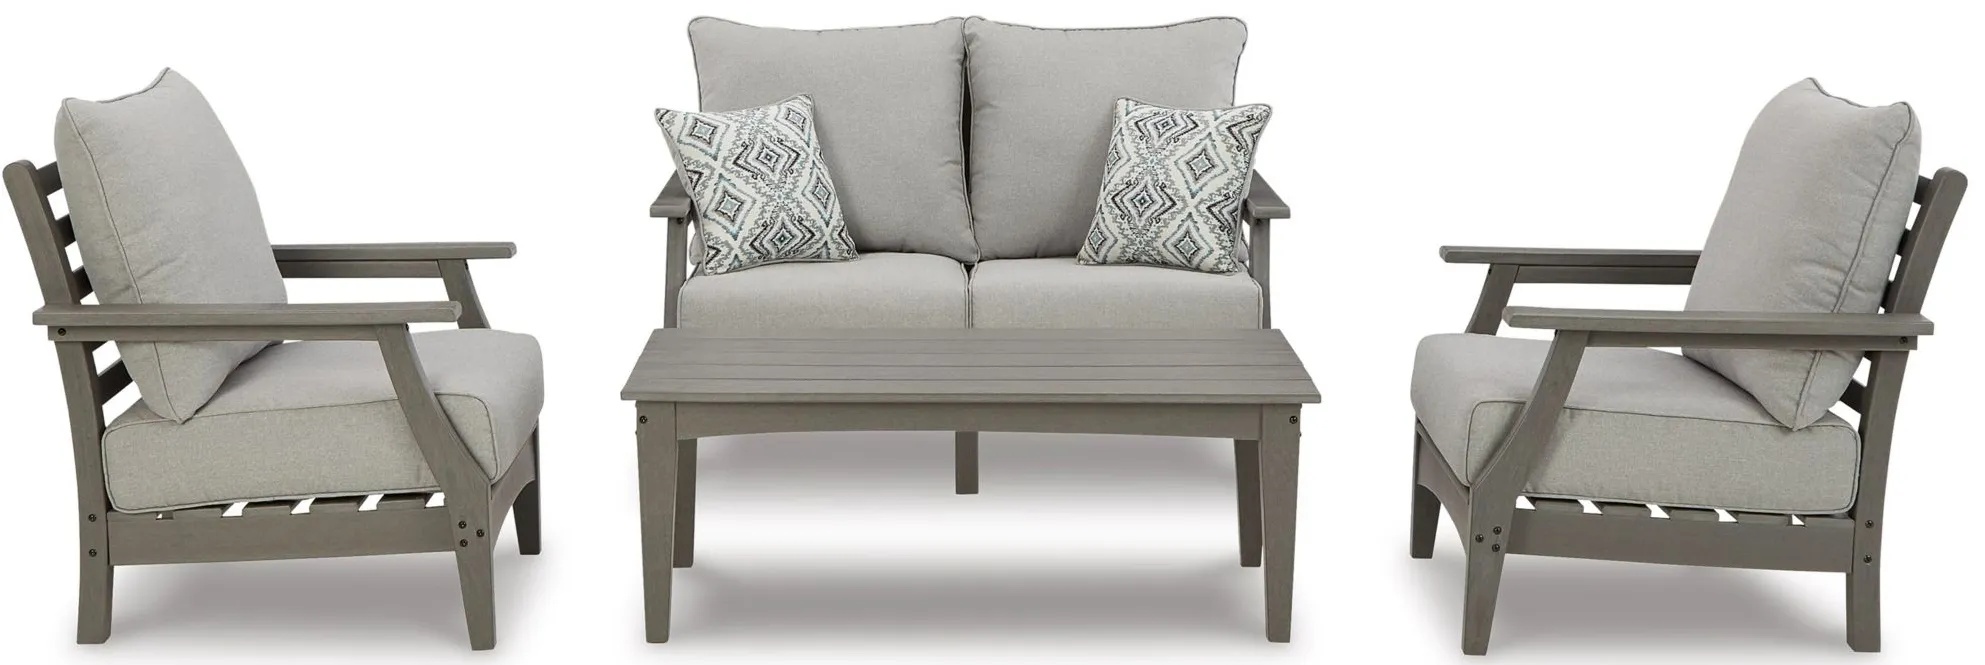 Visola 4-pc. Outdoor Patio Set in Gray by Ashley Furniture